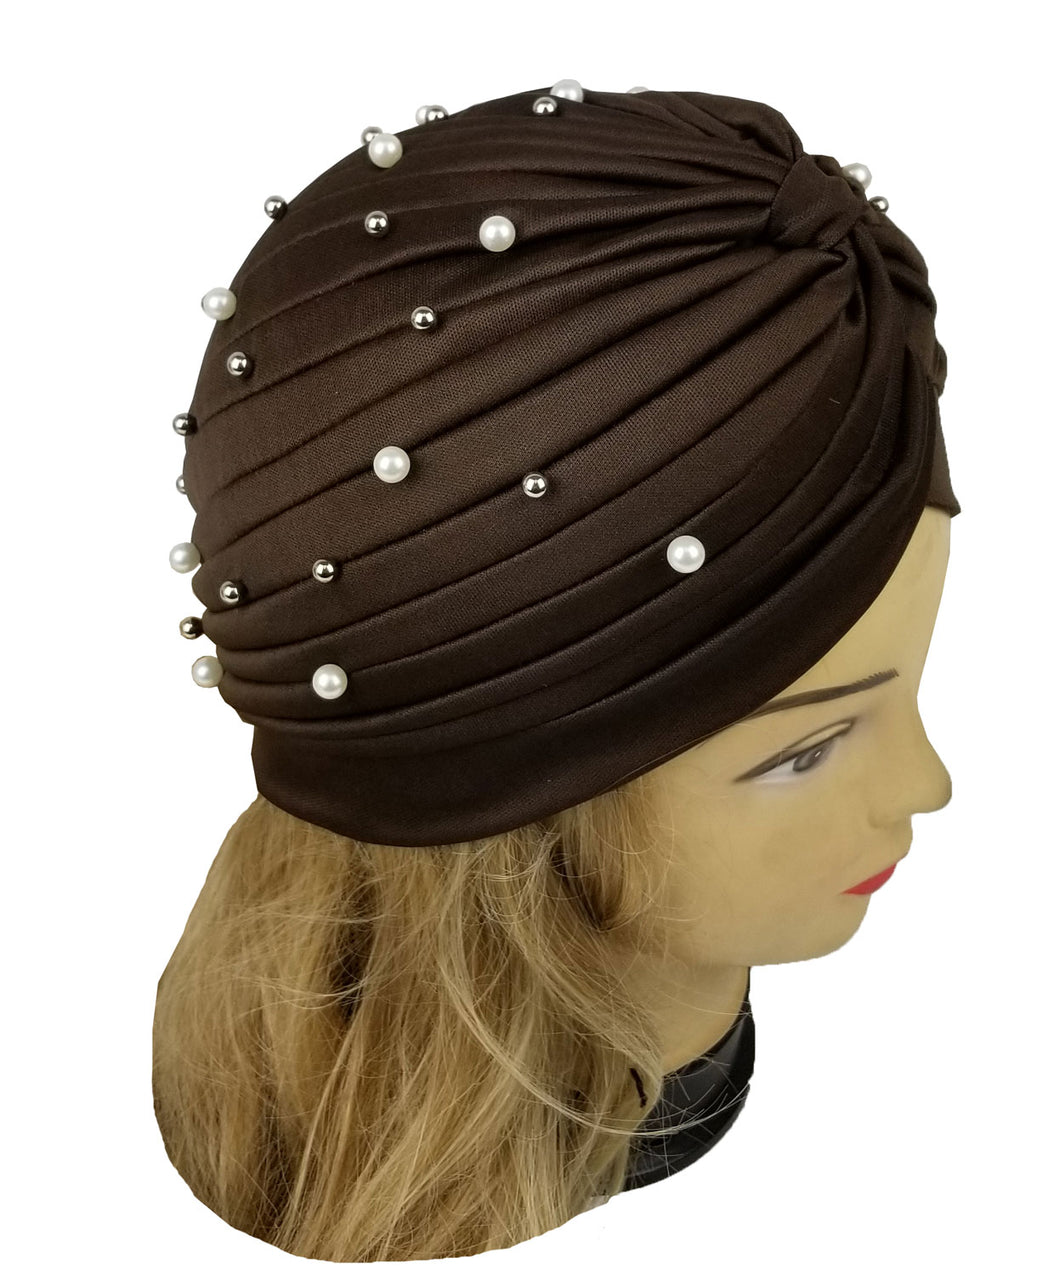 Pearl Beads Stretchy Turban Head Wrap Band Women Chemo Pleated Indian Cap Hat